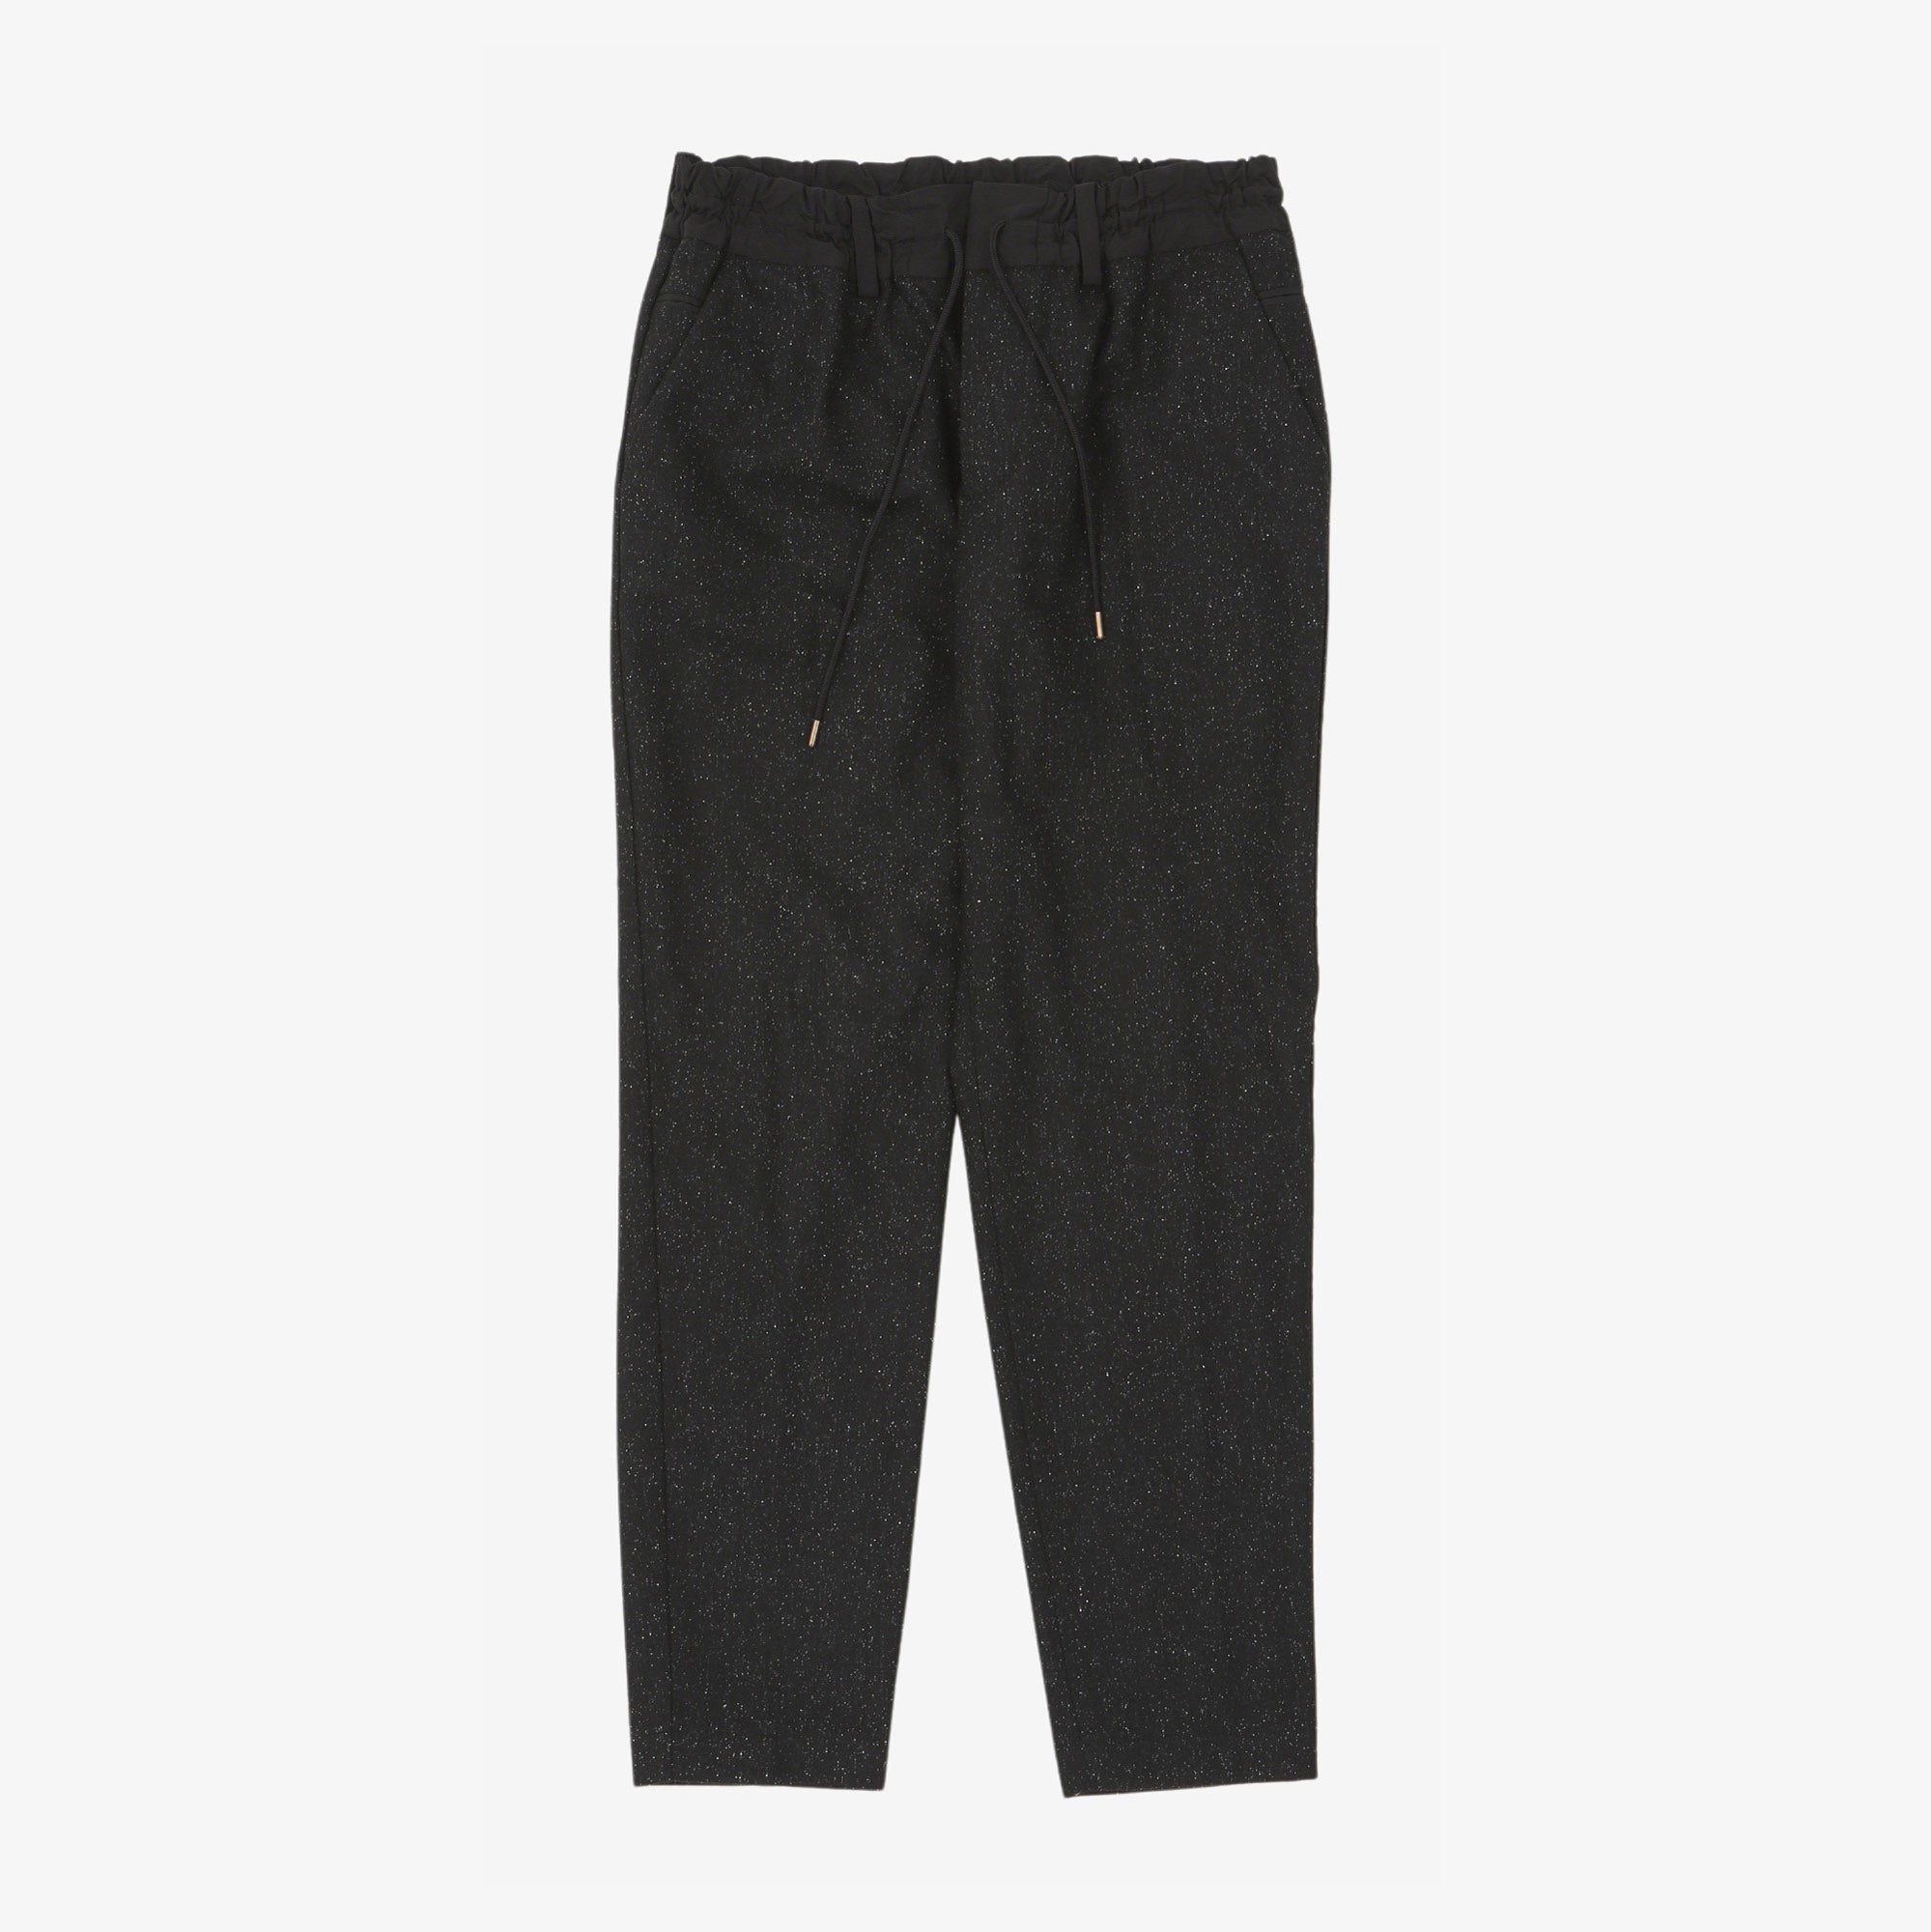 Hungerford Drawstring Trousers